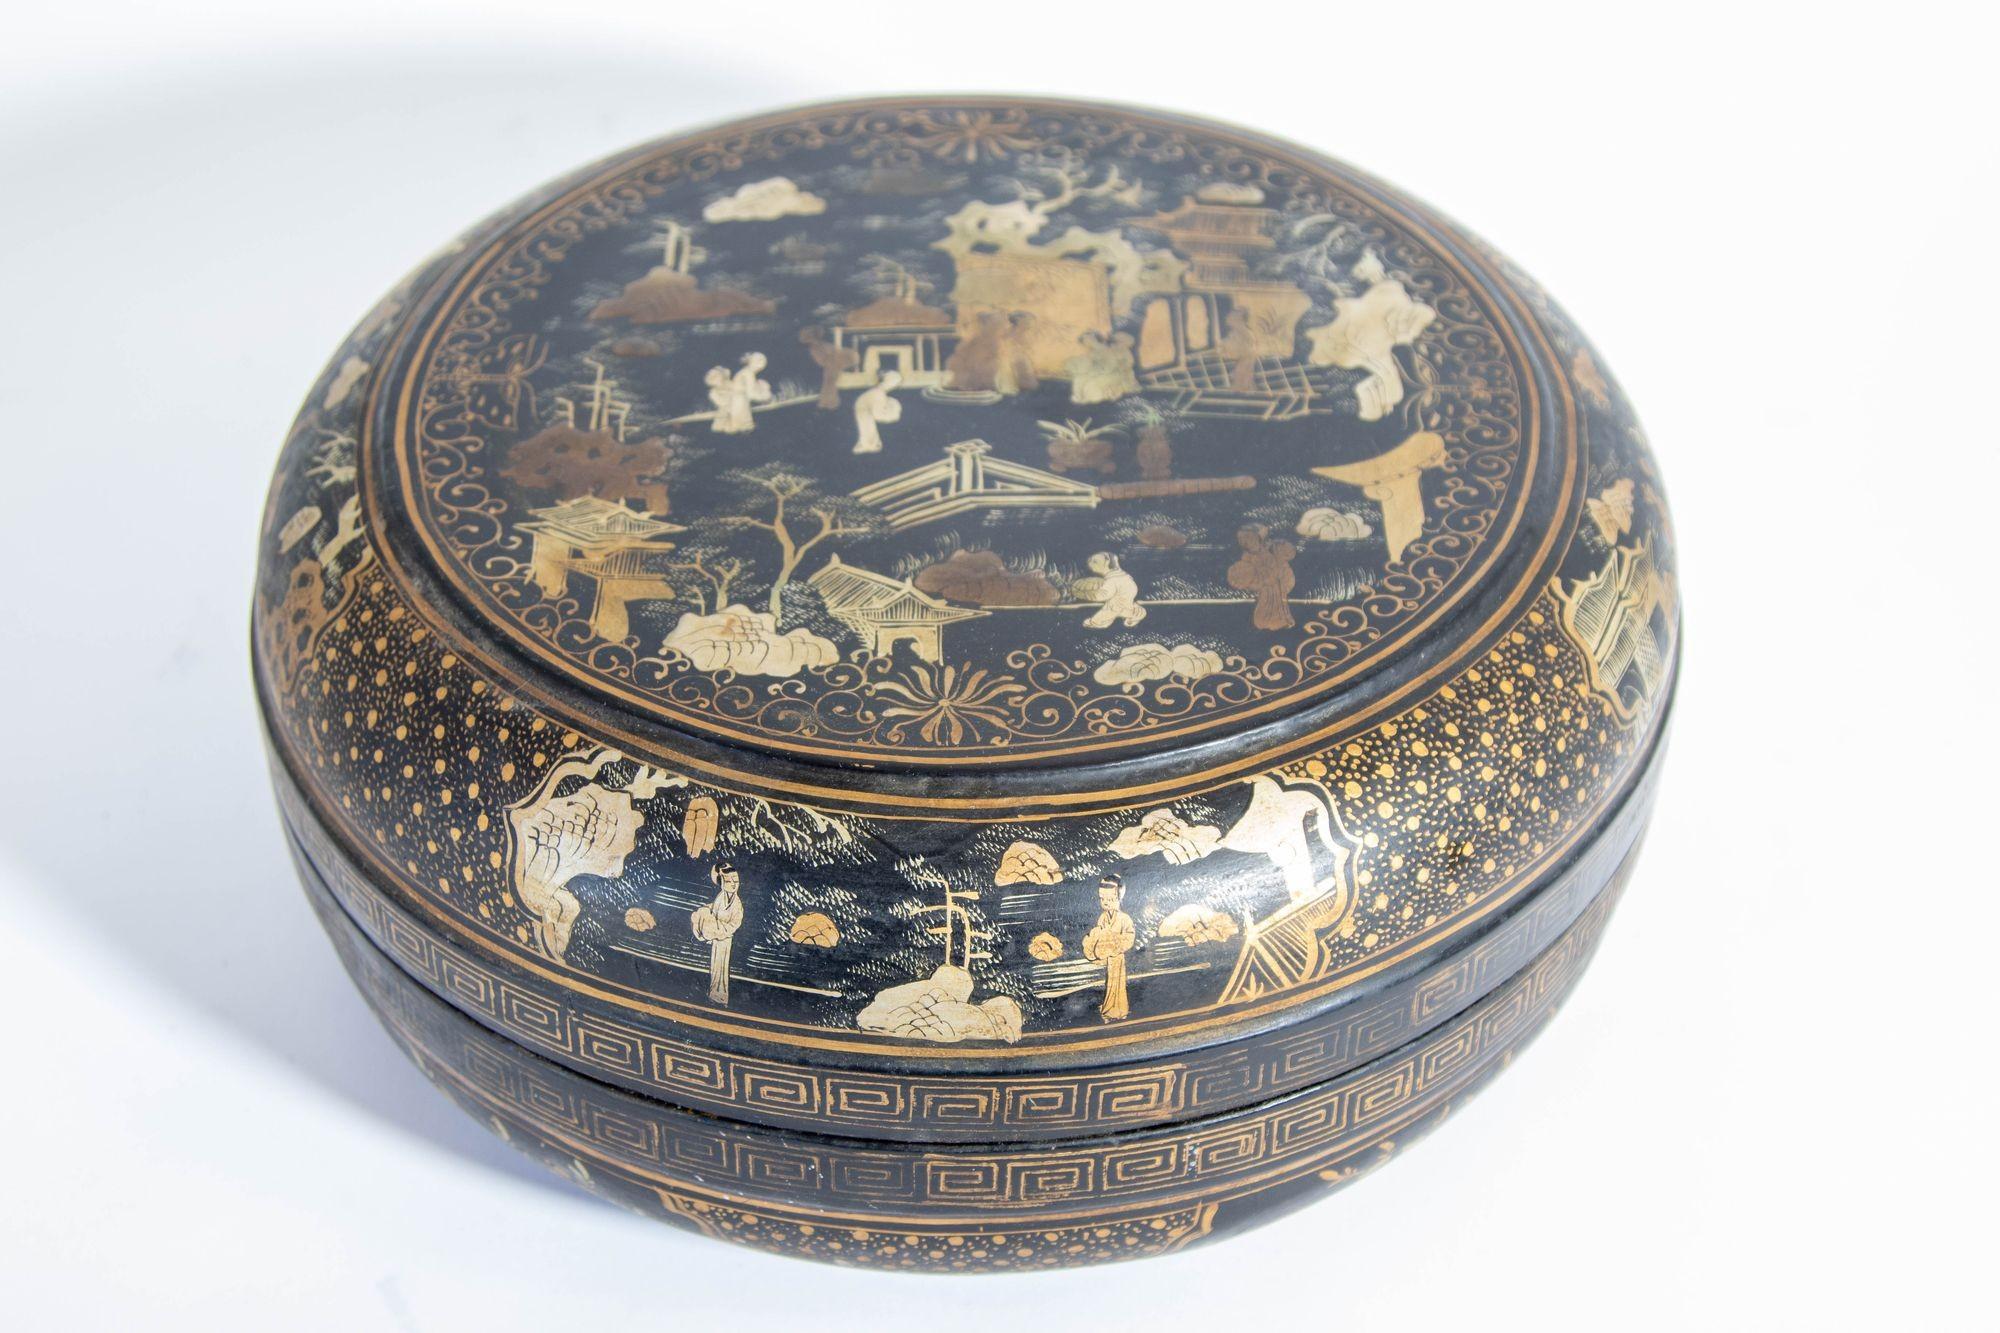 Large Chinese black lacquered box with numerous figures and gilt detail.
Chinese round black lacquer and gilt painted box, made for the export market.
The round black lacquer box is decorated with beautiful gilt painting. The lid of the box painted